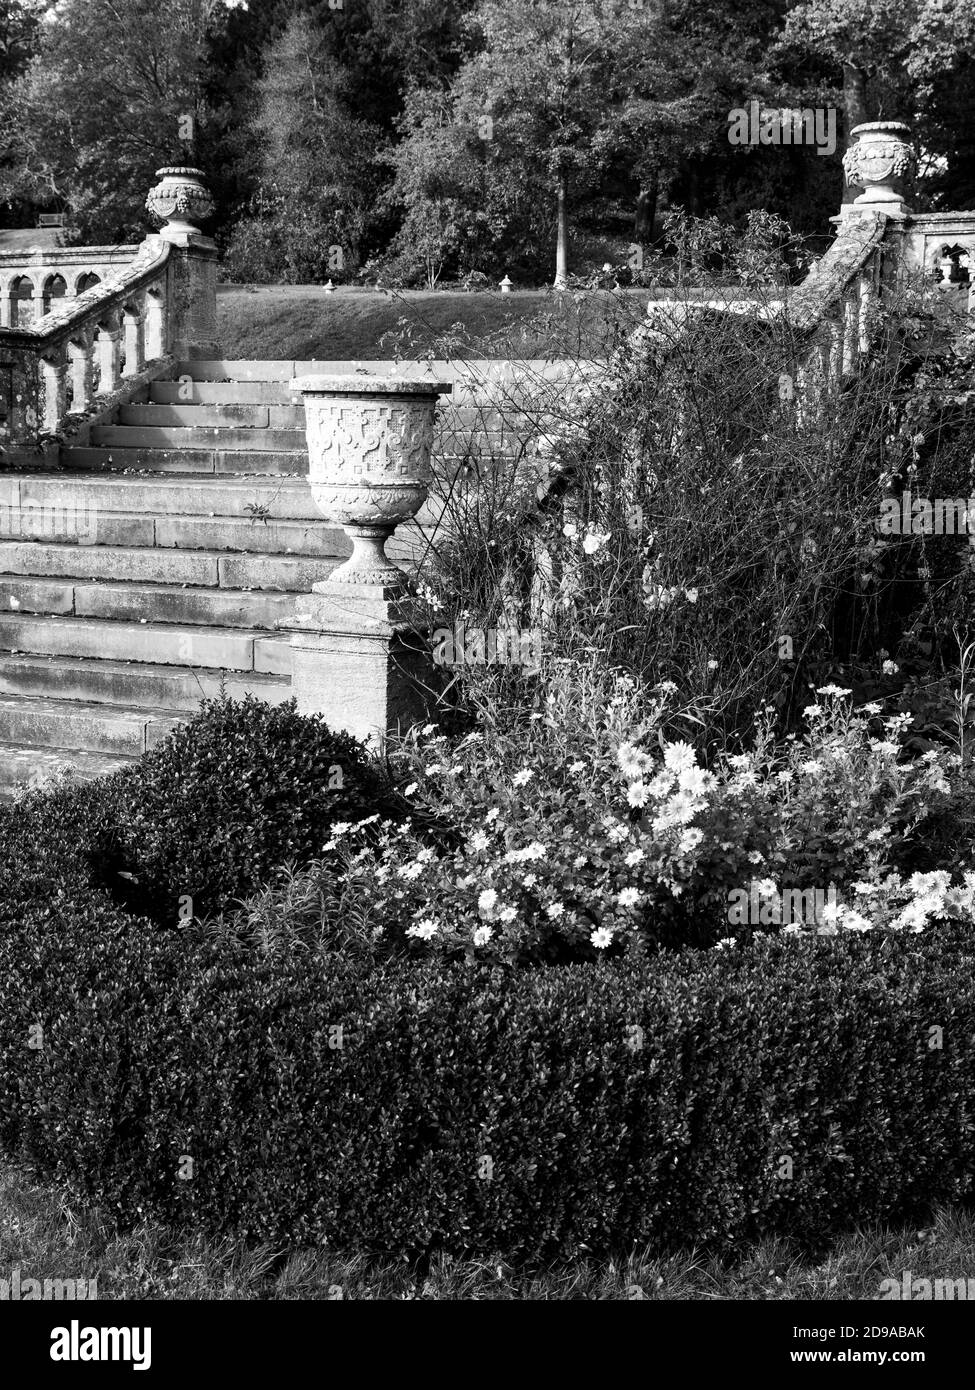 Steps, Black and White Country House Gardens, Englefield House, Englefield, Thale, Reading, Berkshire, Inghilterra, Regno Unito, GB. Foto Stock